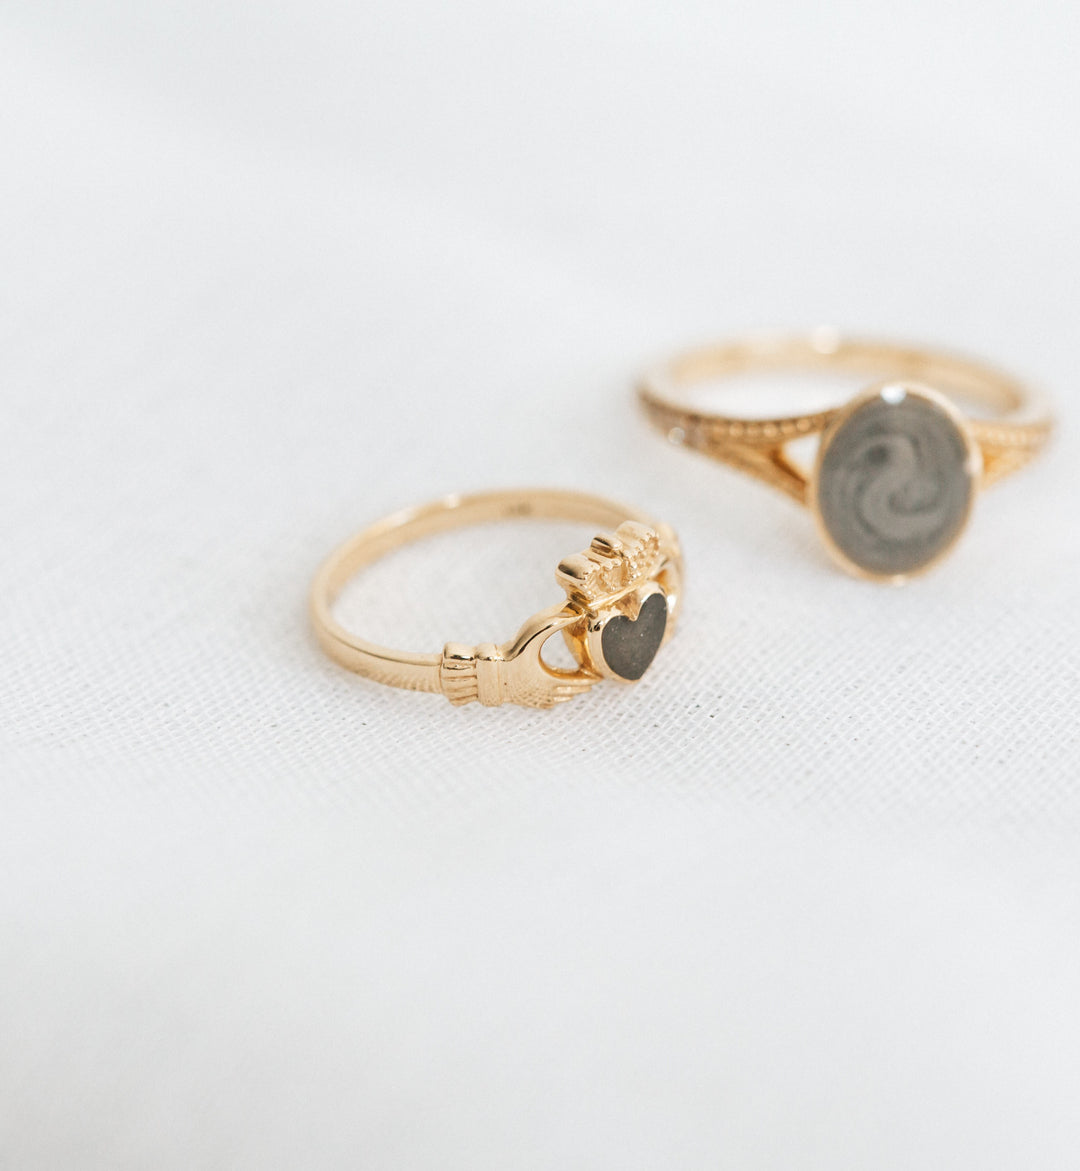 Pictured here is close by me jewelry's 14K Yellow Gold Claddagh Ashes Ring lying flat on a piece of textured white cloth